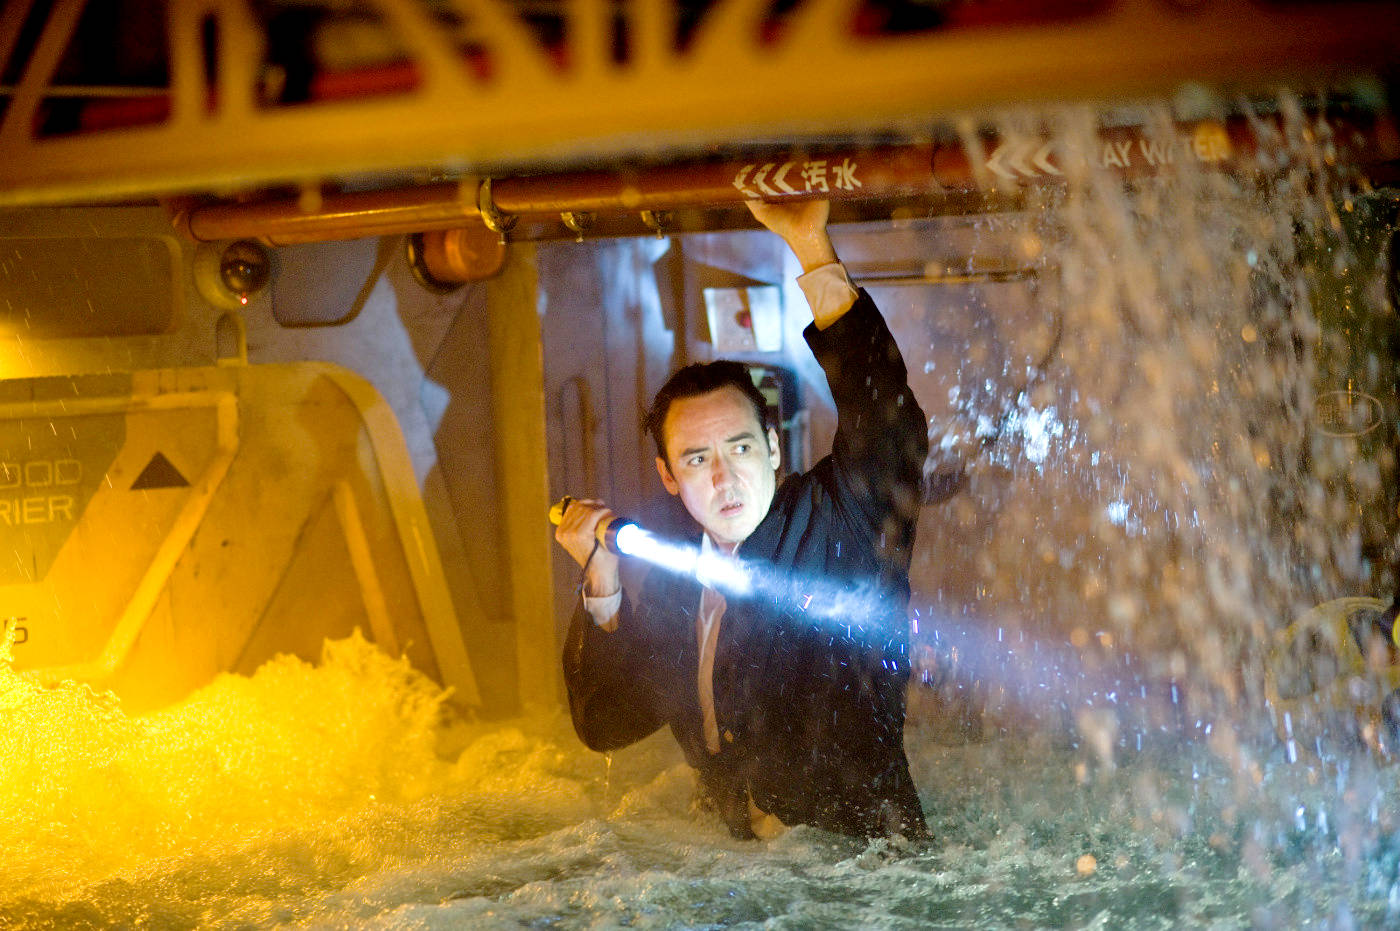 John Cusack stars as Jackson Curtis in Columbia Pictures' 2012 (2009)